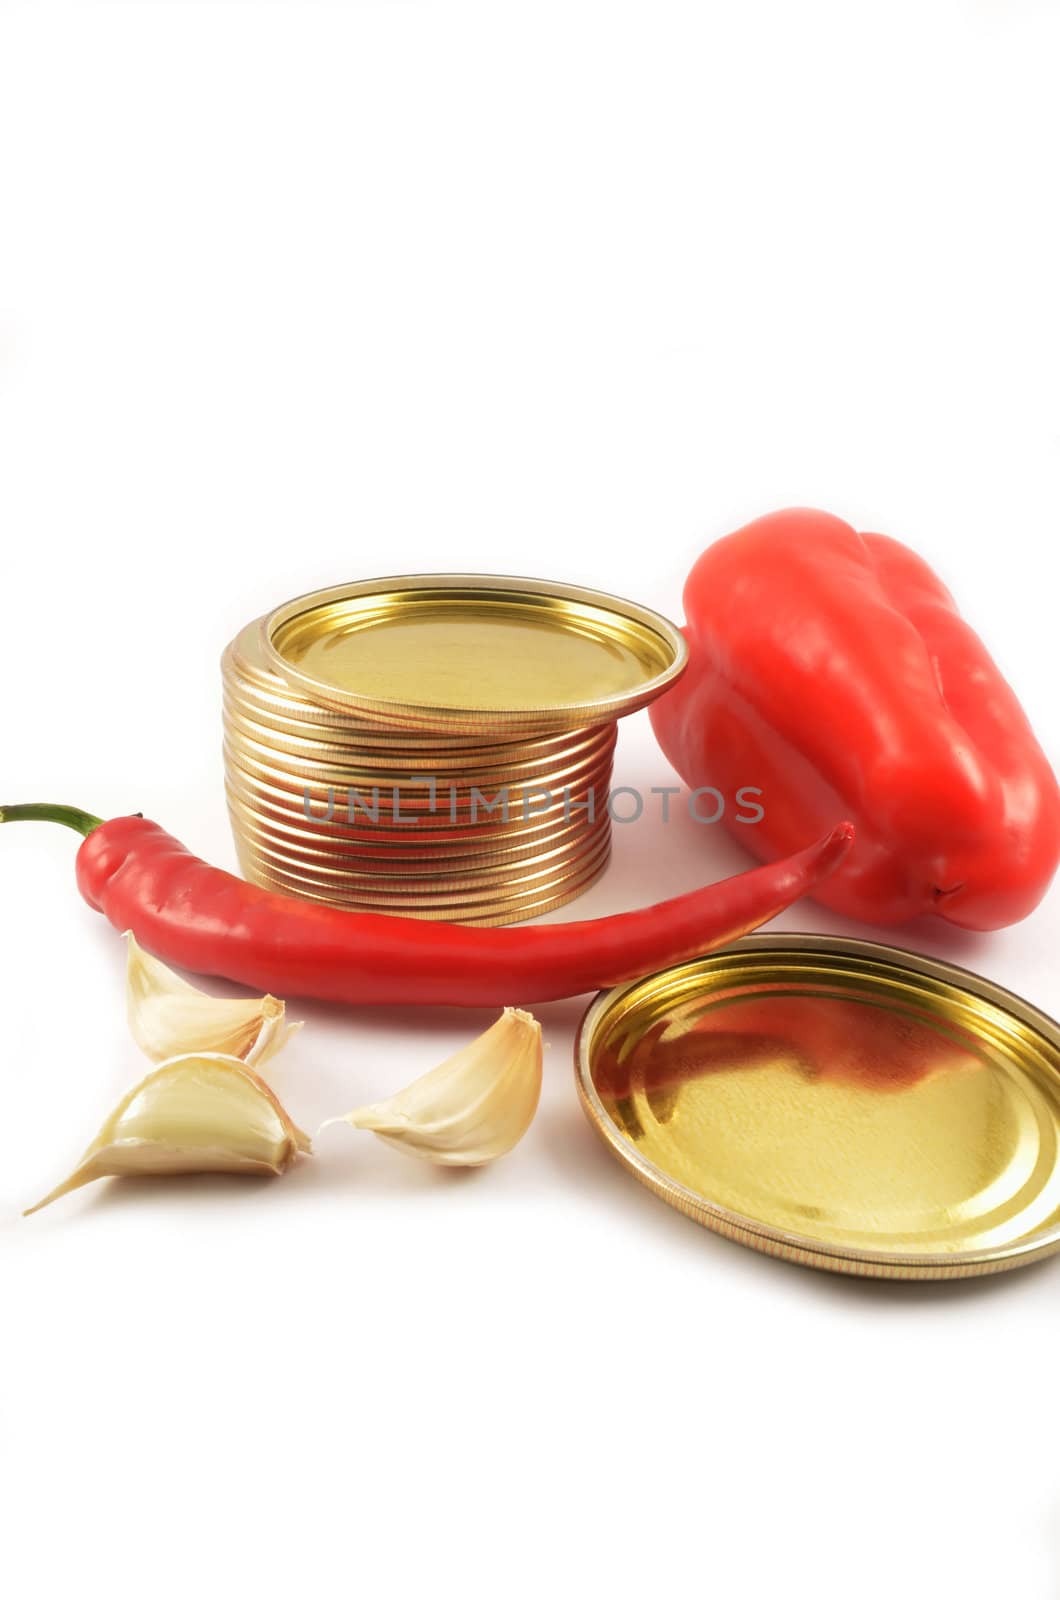 Sweet and sharp red peppers, garlic and metal covers for cans